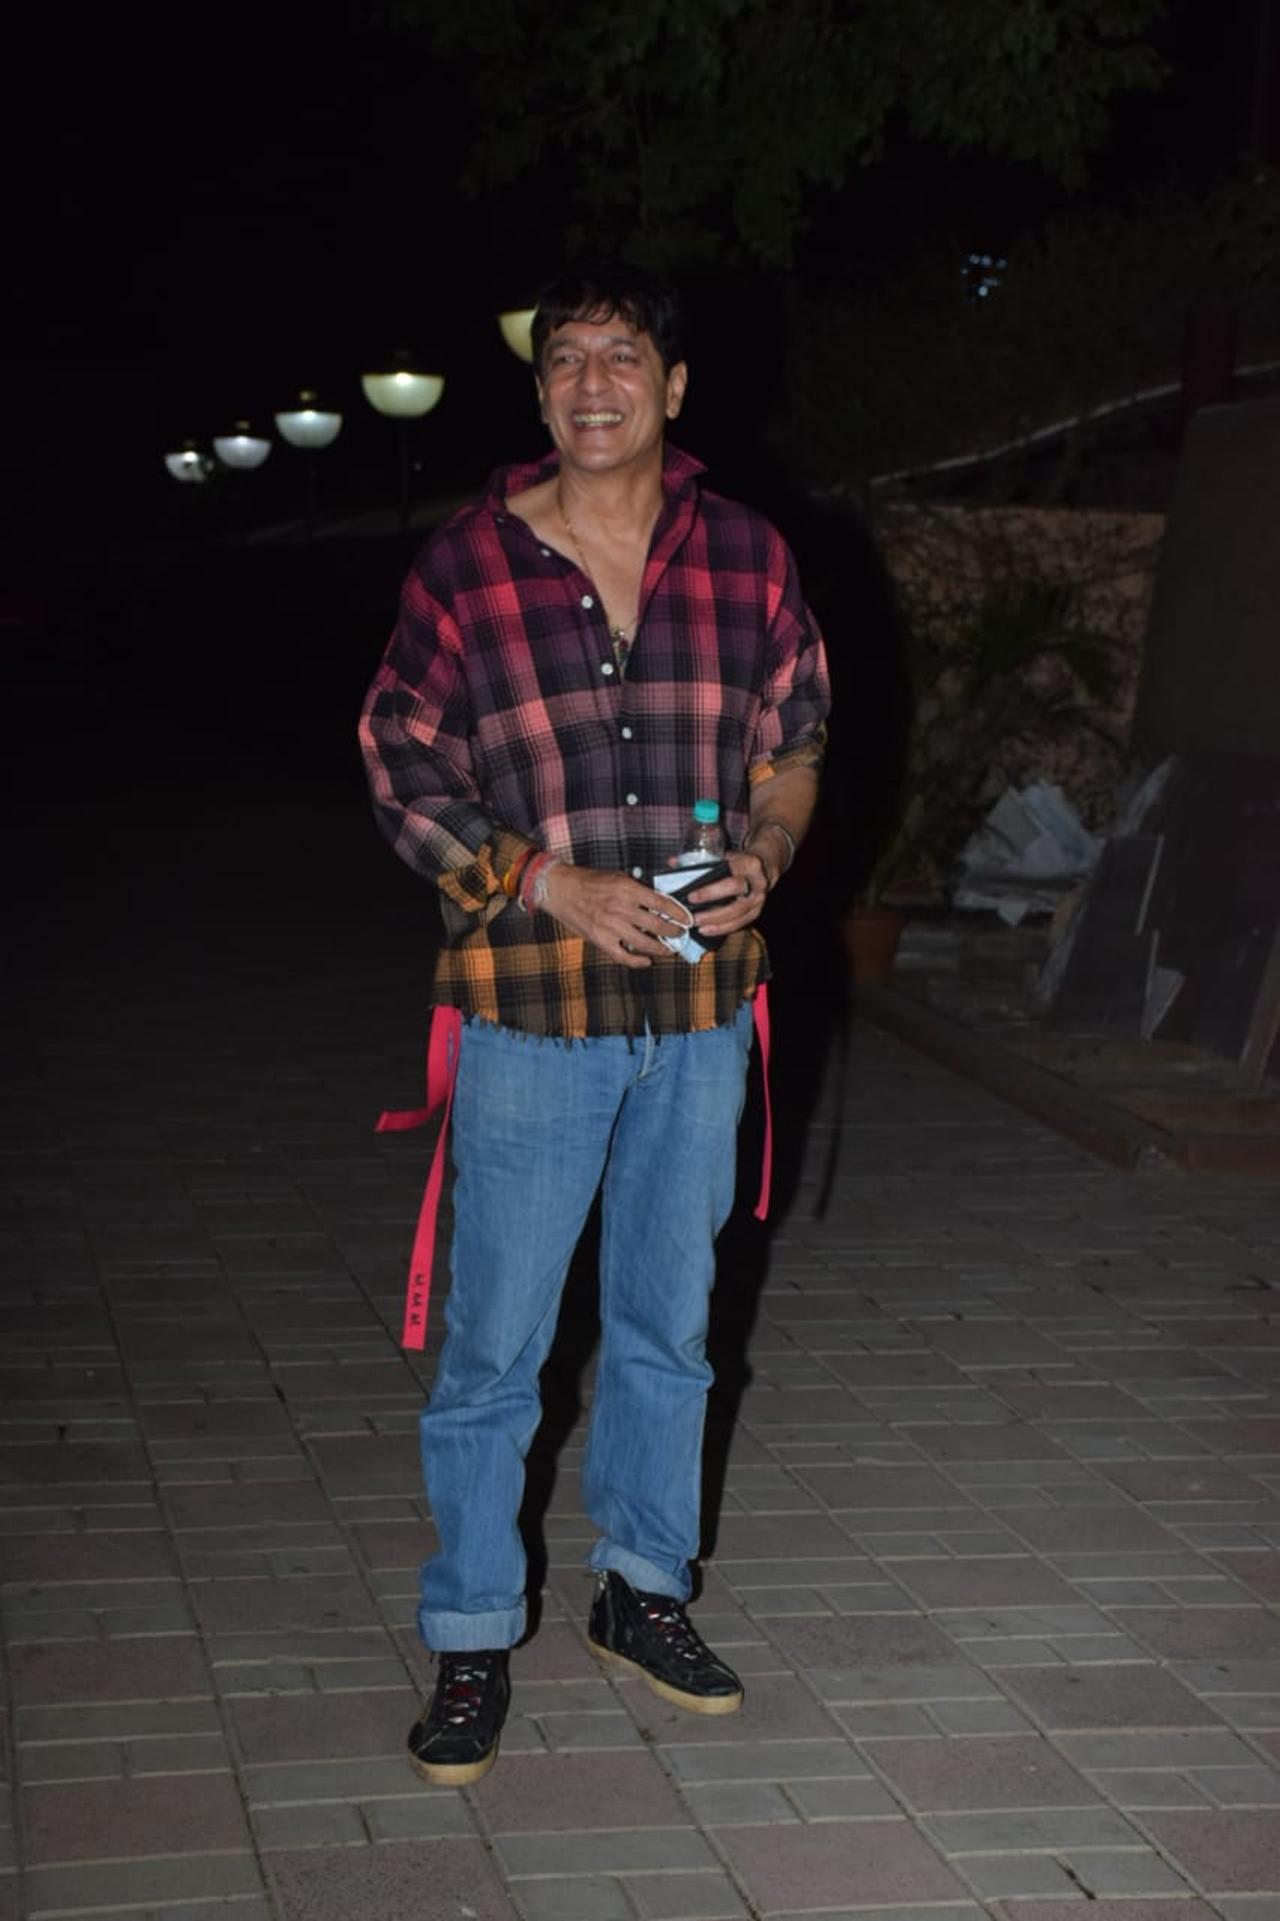 Chunky Pandey accompanied his daughter Ananya to the screening. The yesteryear actor looked extremely happy as he attended the special show of Gehraiyaan.